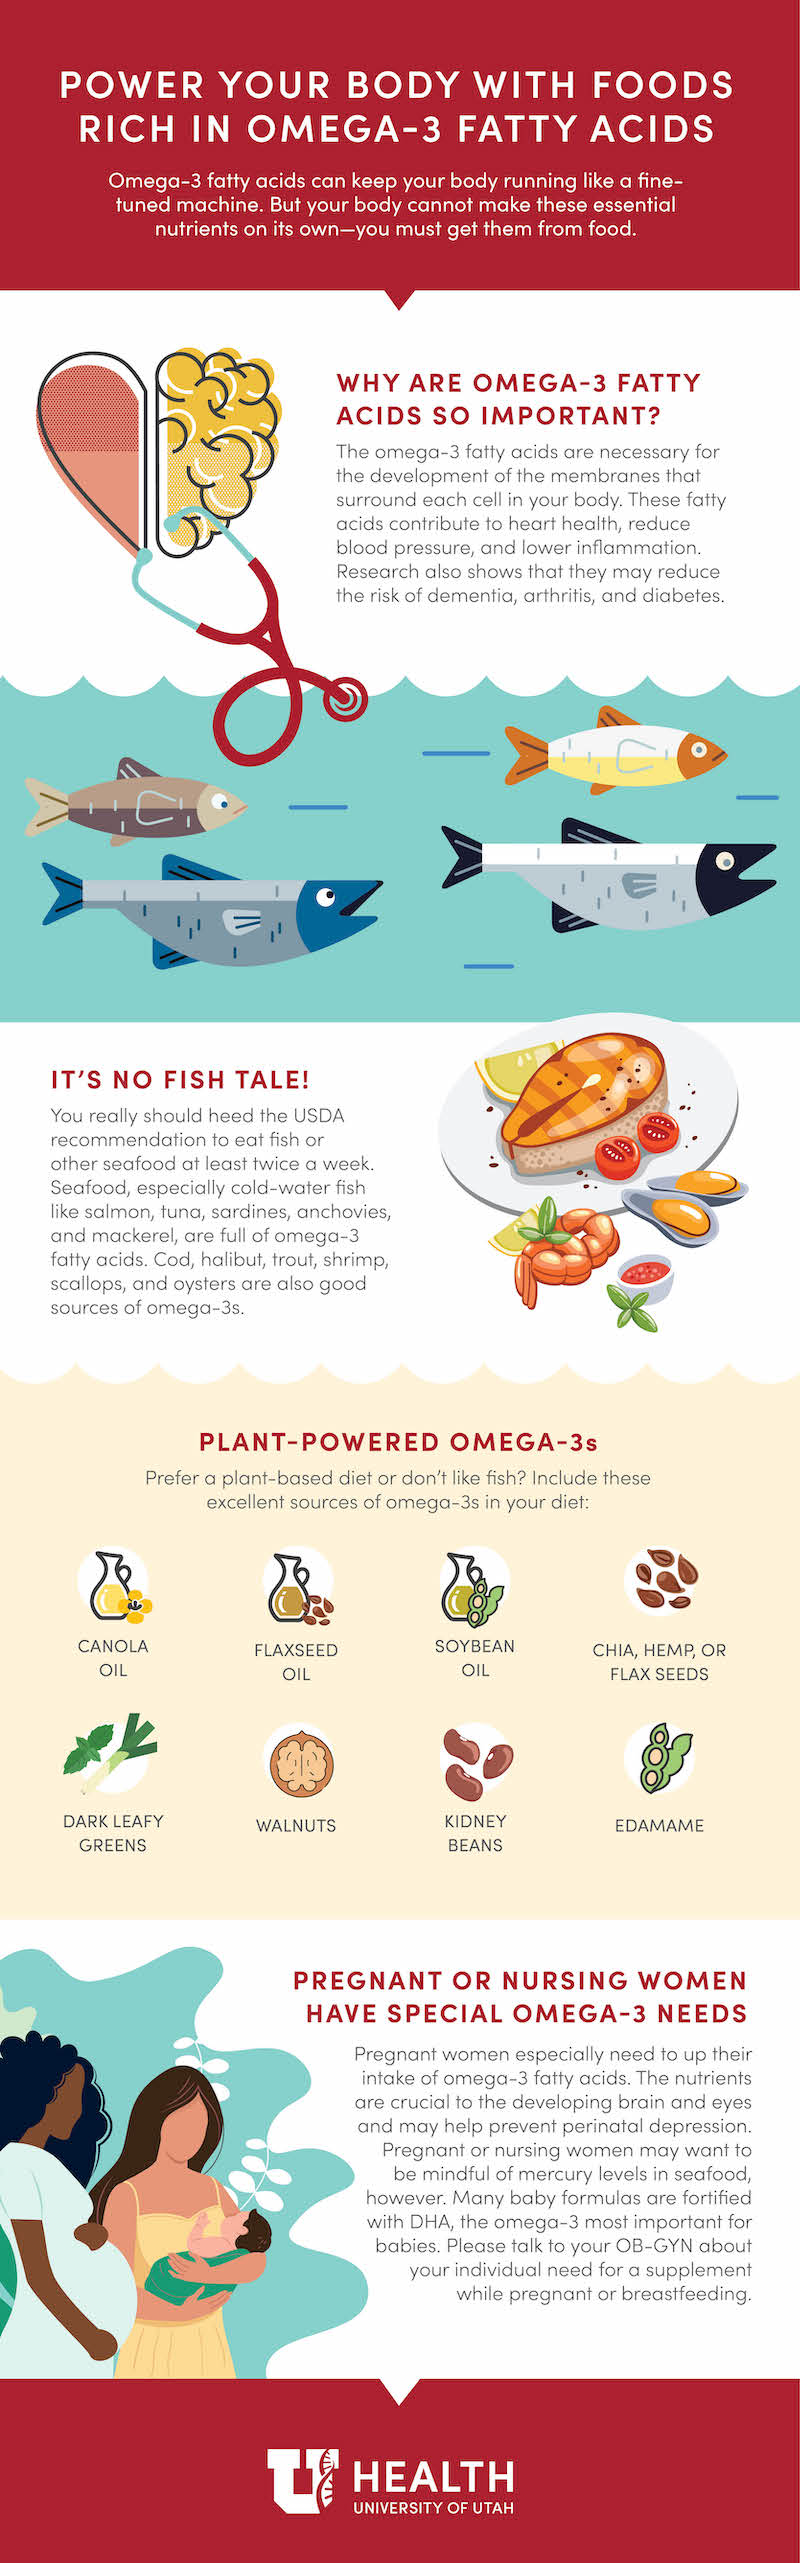 Infographic shows how to incorporate omega-3s in your diet.